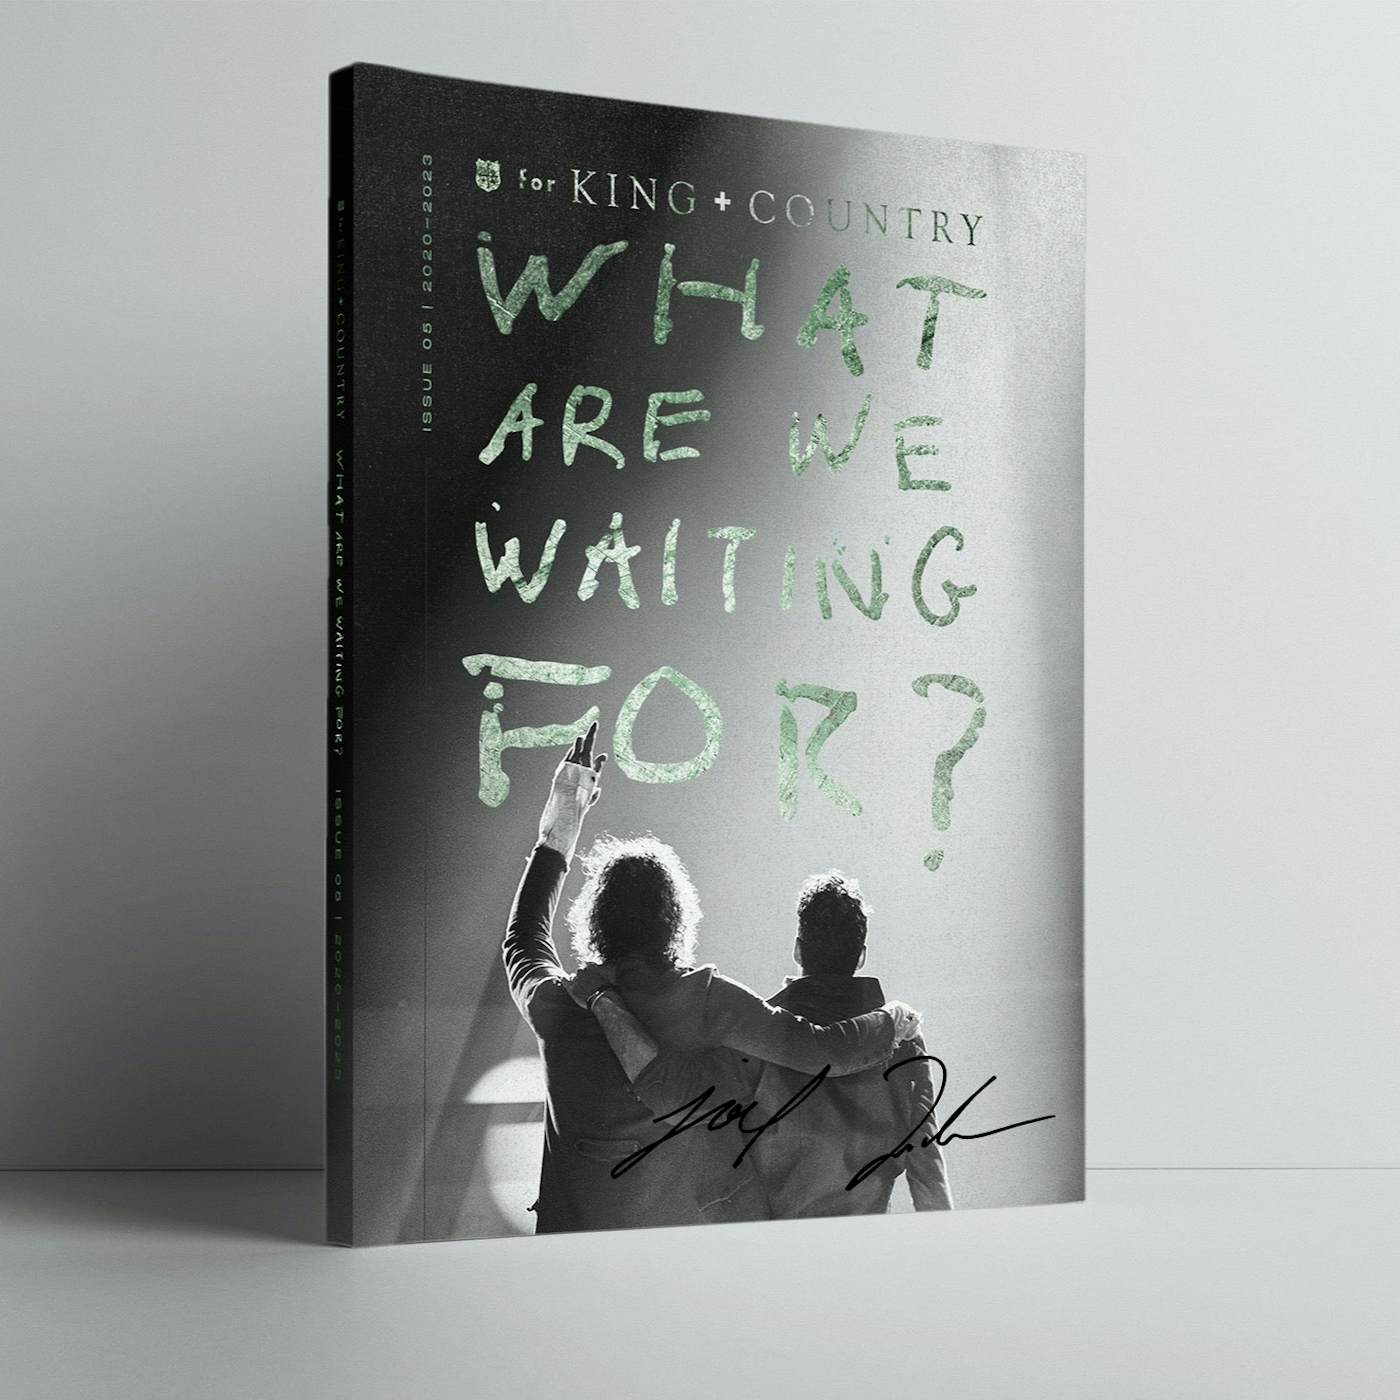 for KING & COUNTRY for KING + COUNTRY | What Are We Waiting For?  | Photobook [AUTOGRAPHED]